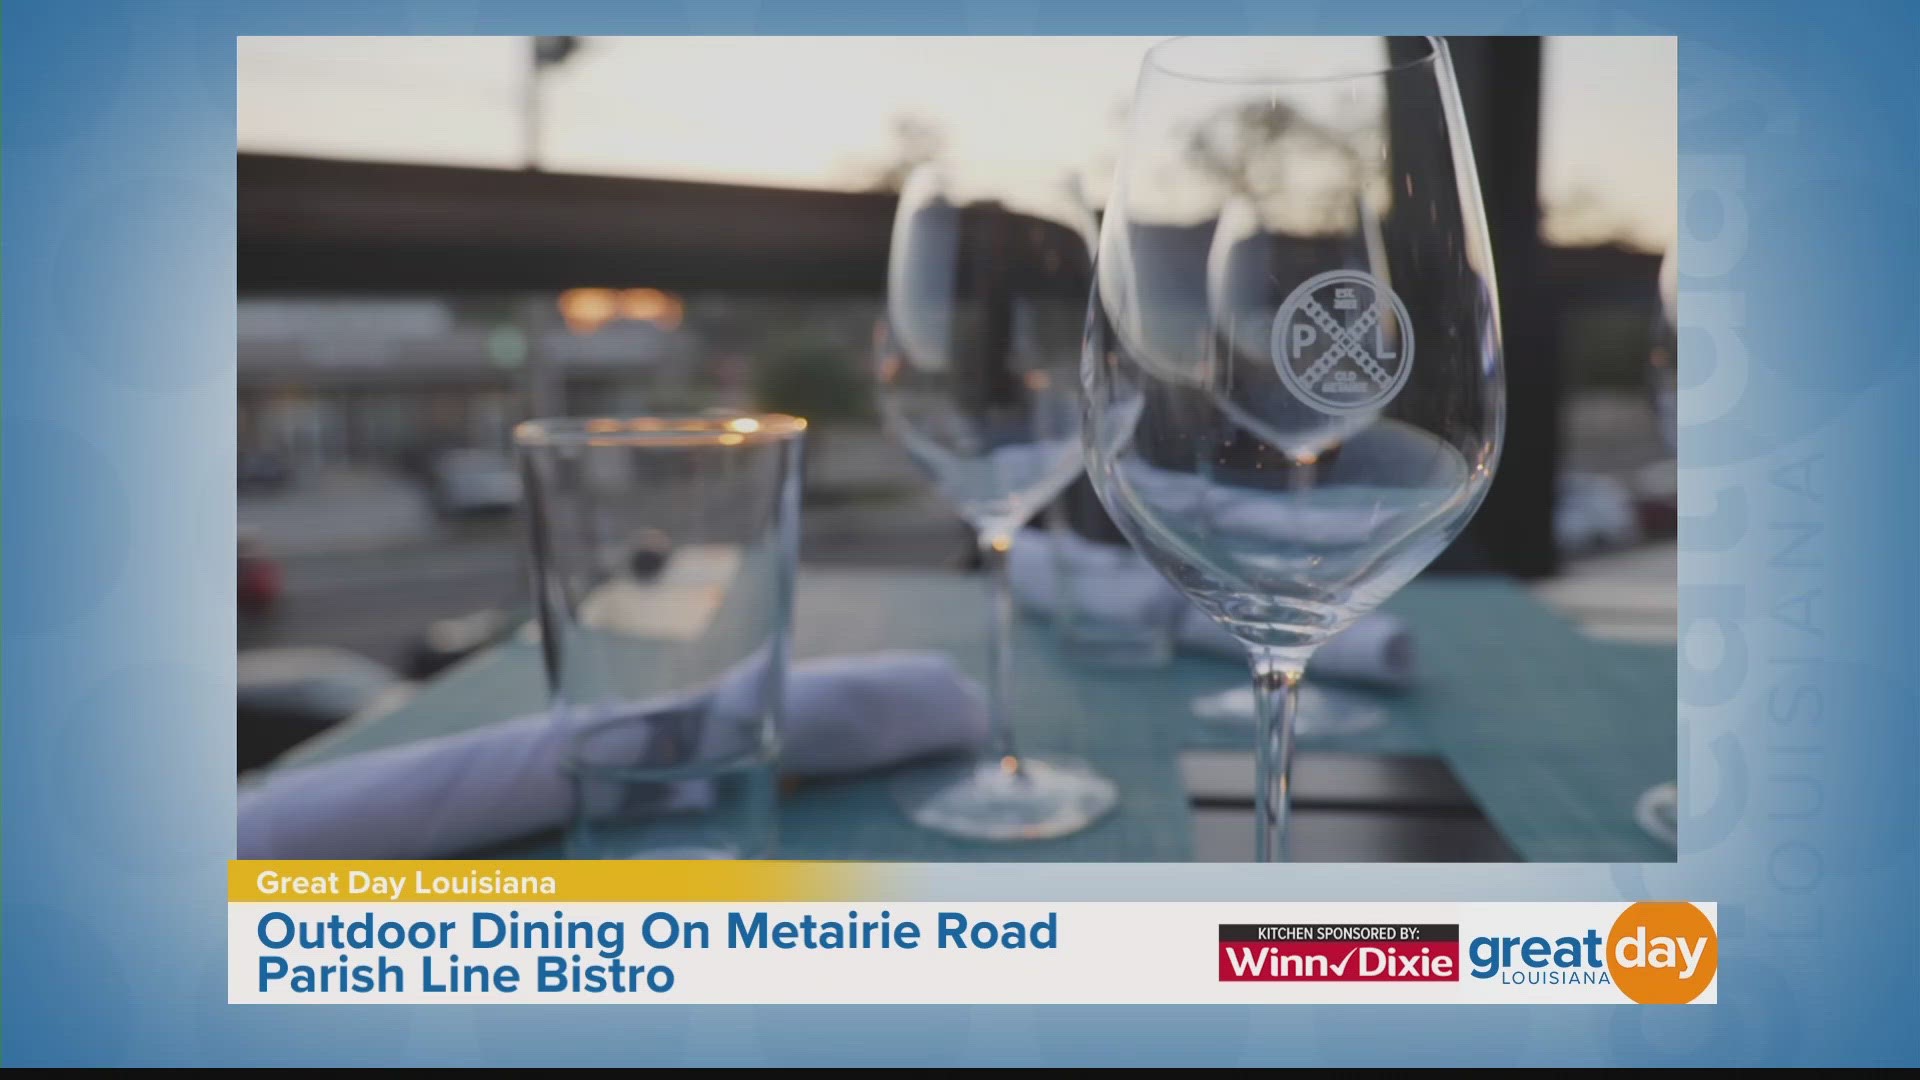 Parish Line Bistro shares another dish from their menu.